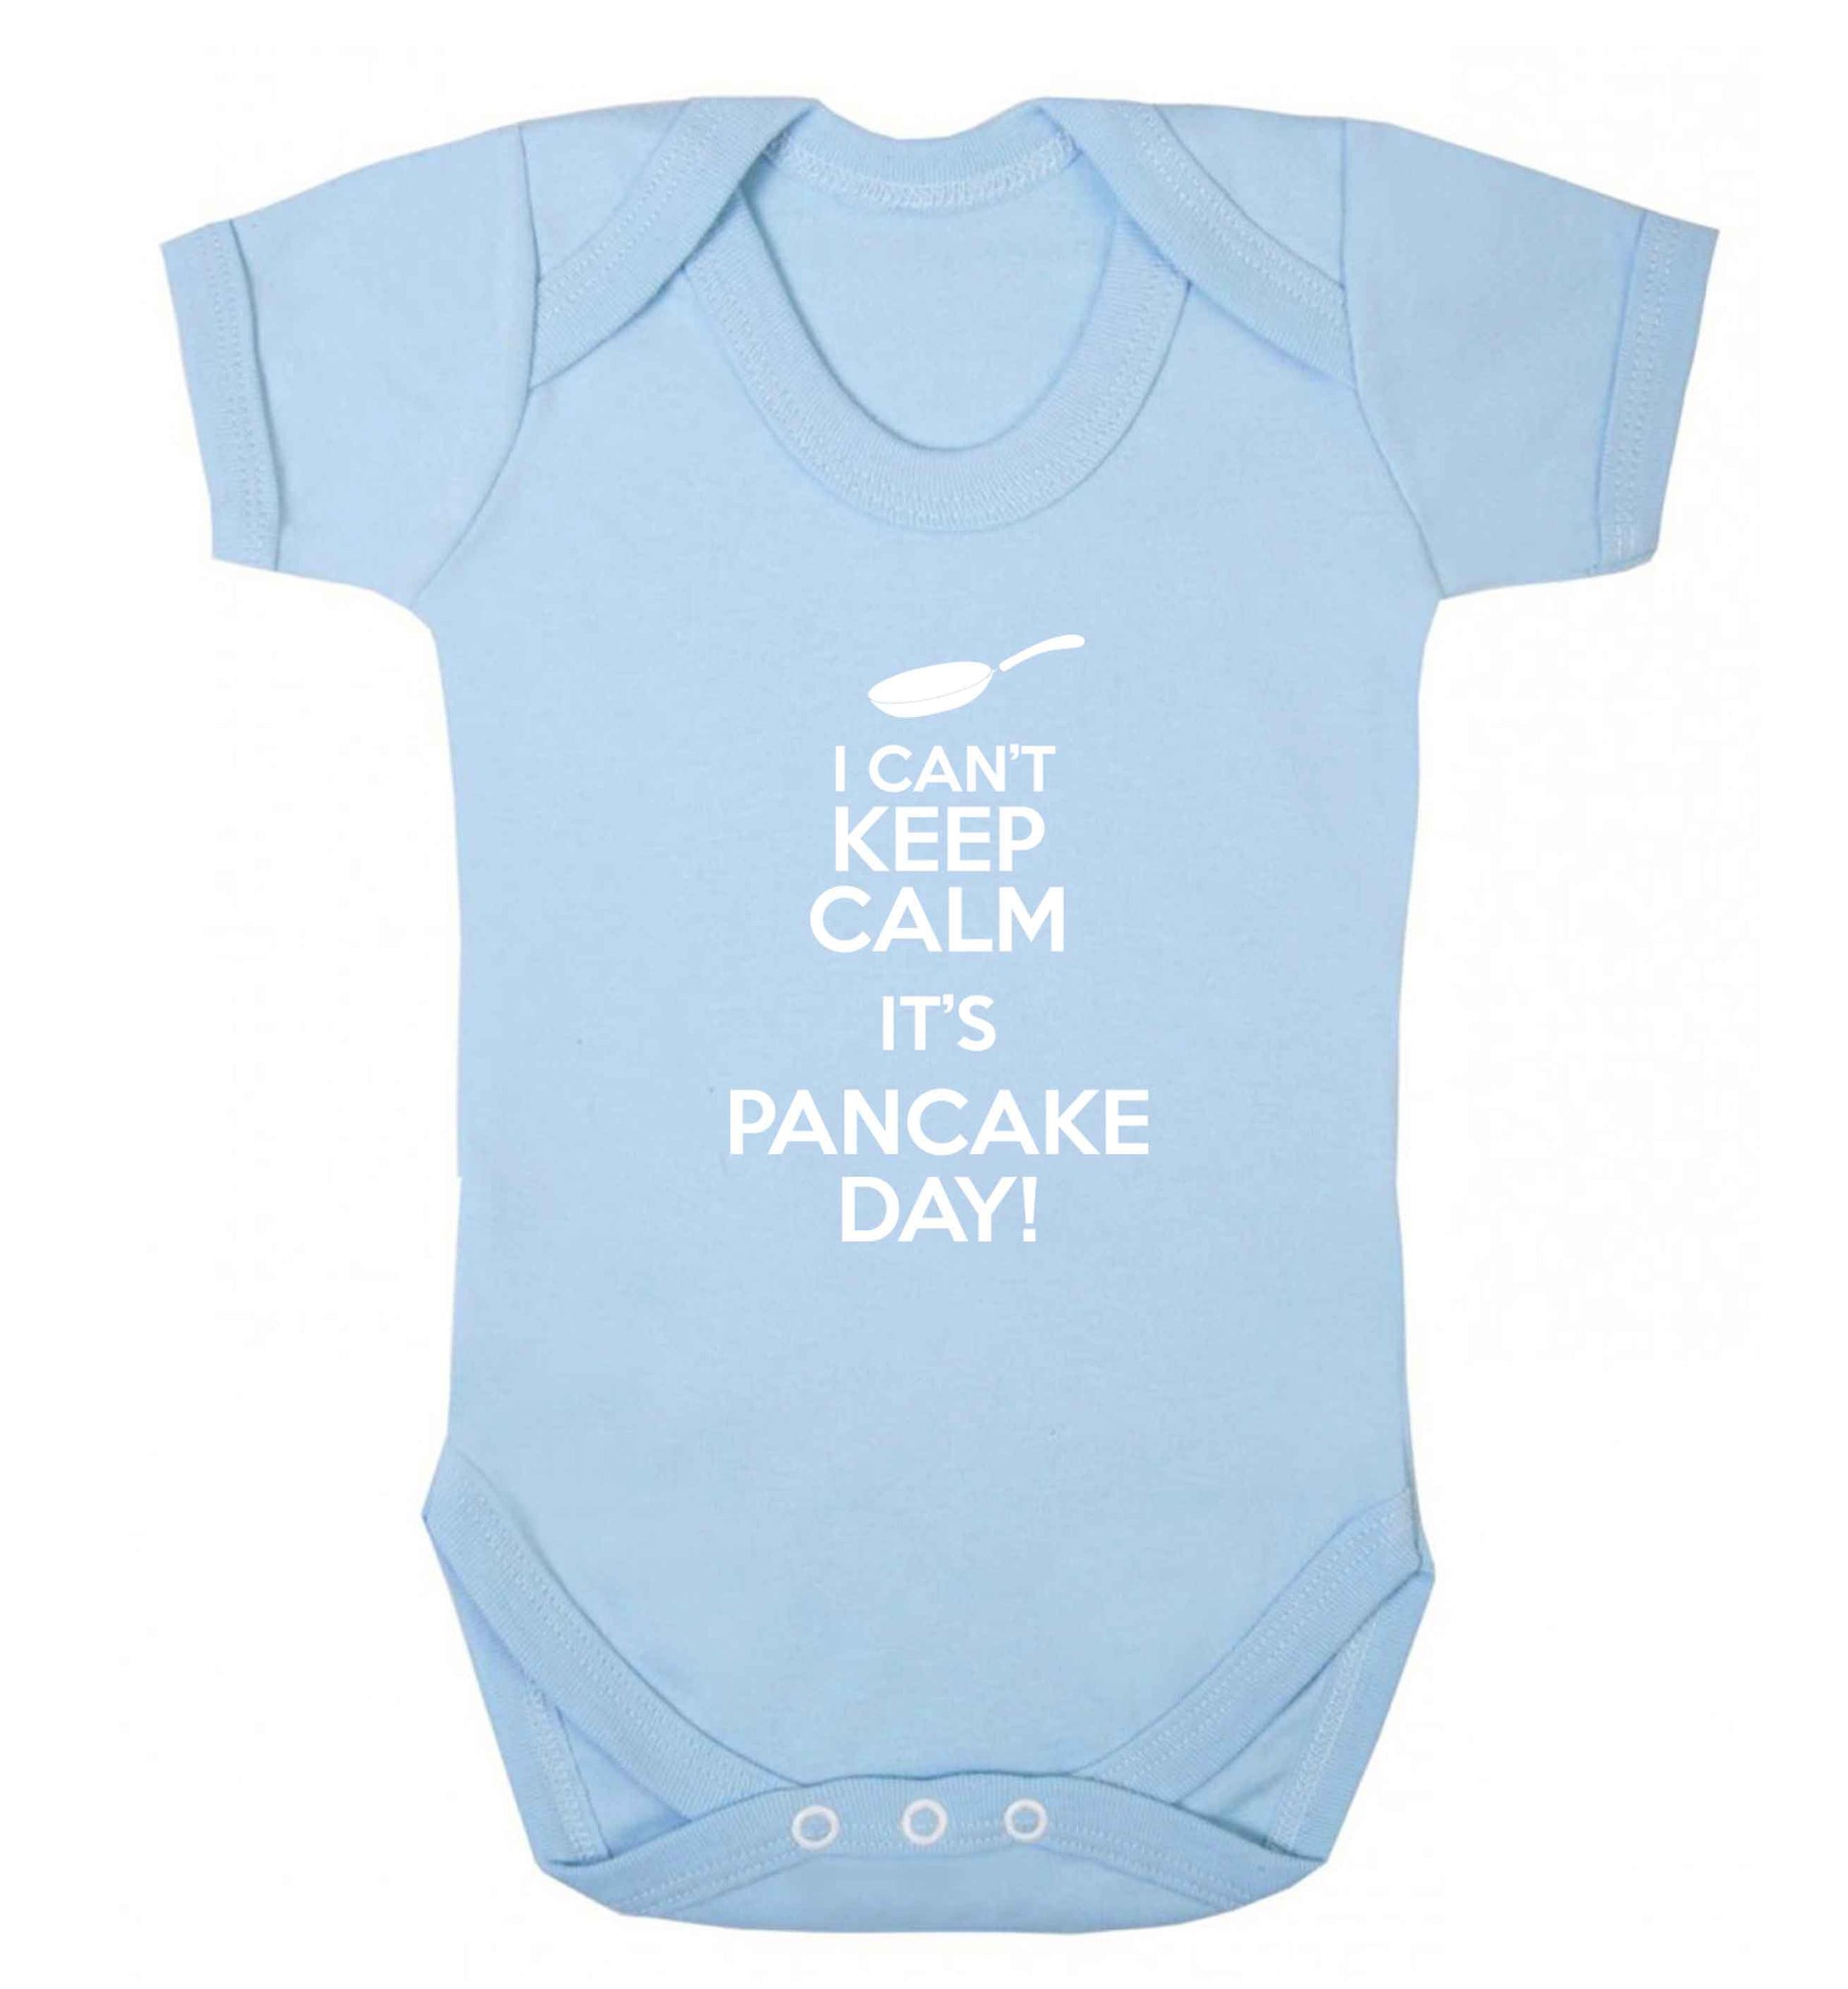 I can't keep calm it's pancake day! baby vest pale blue 18-24 months